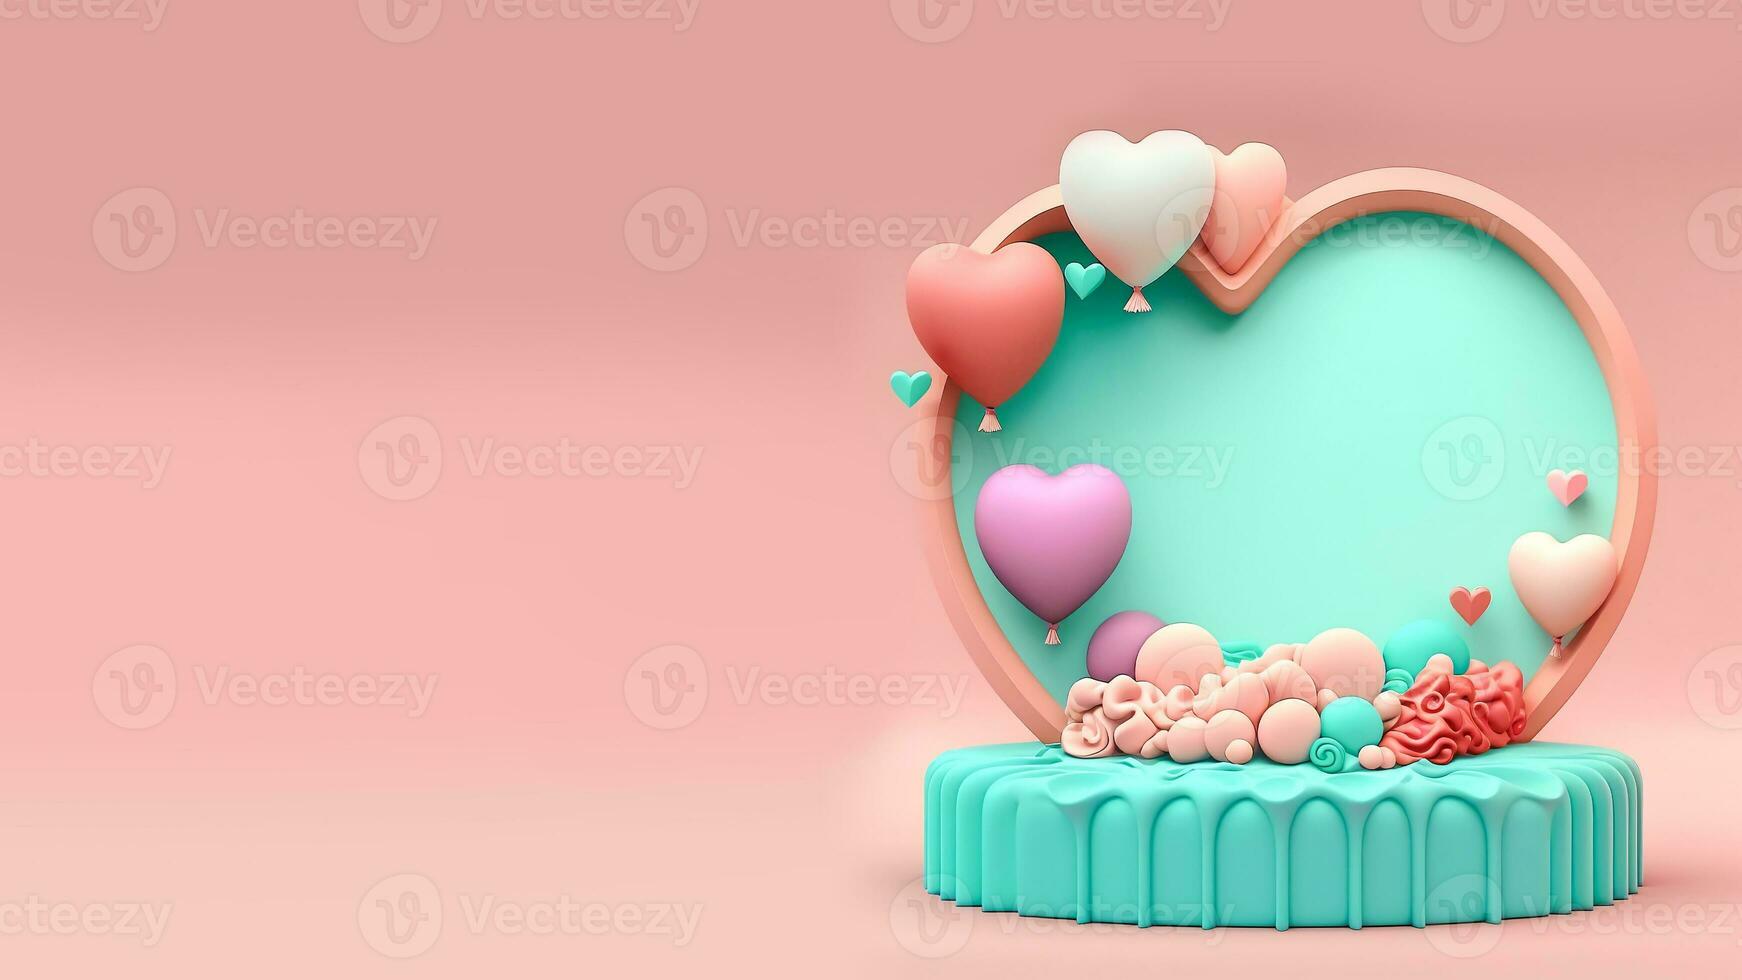 3D Rendering of Heart Shape Frame With Podium, Balloons And Decorative Elements. photo